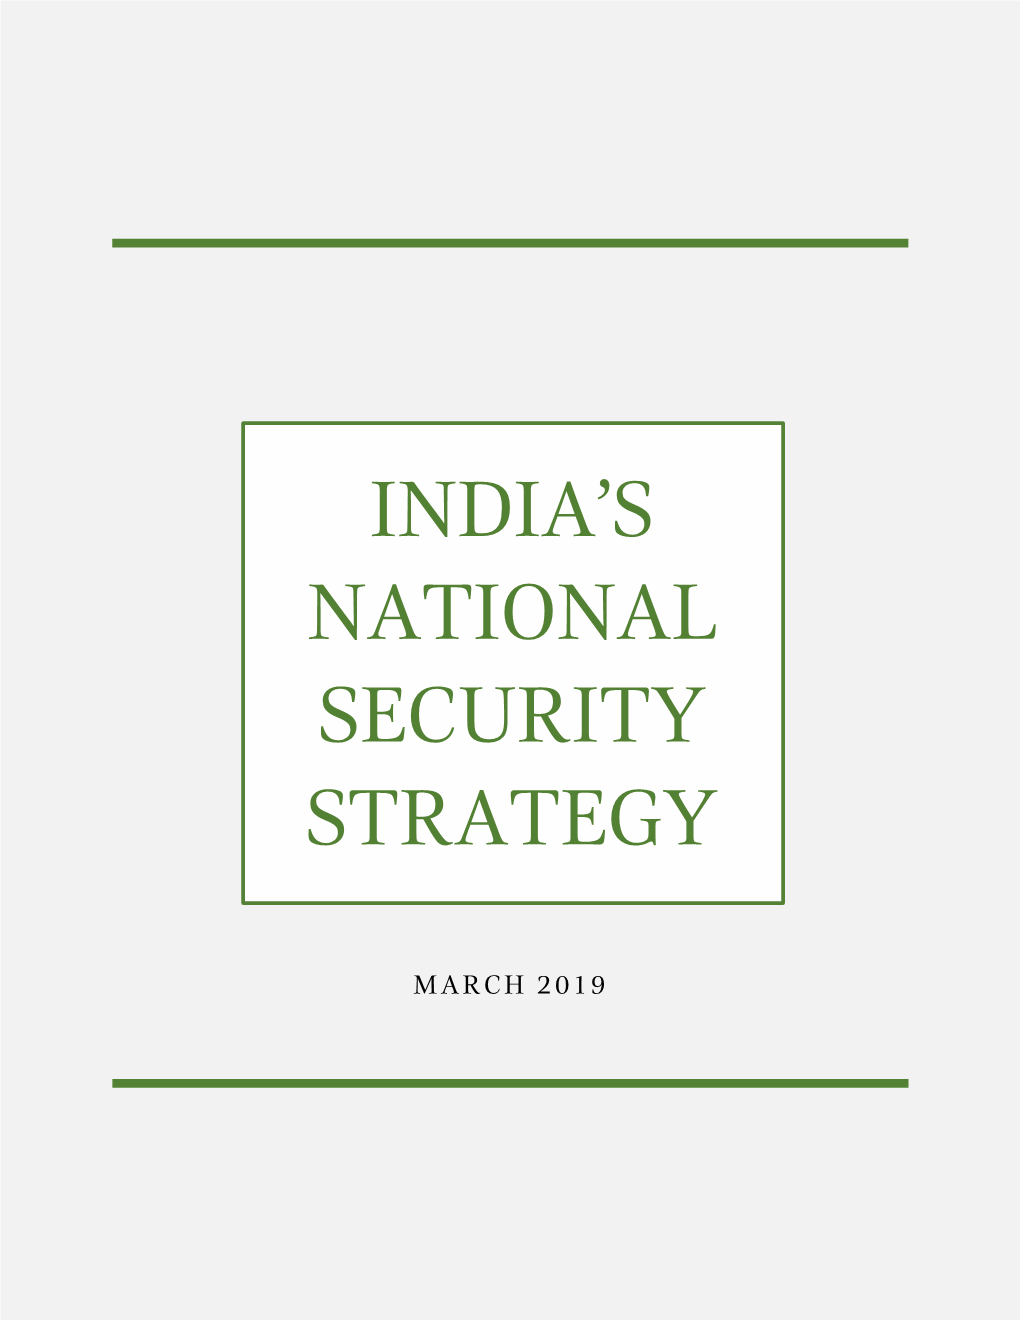 India's National Security Strategy